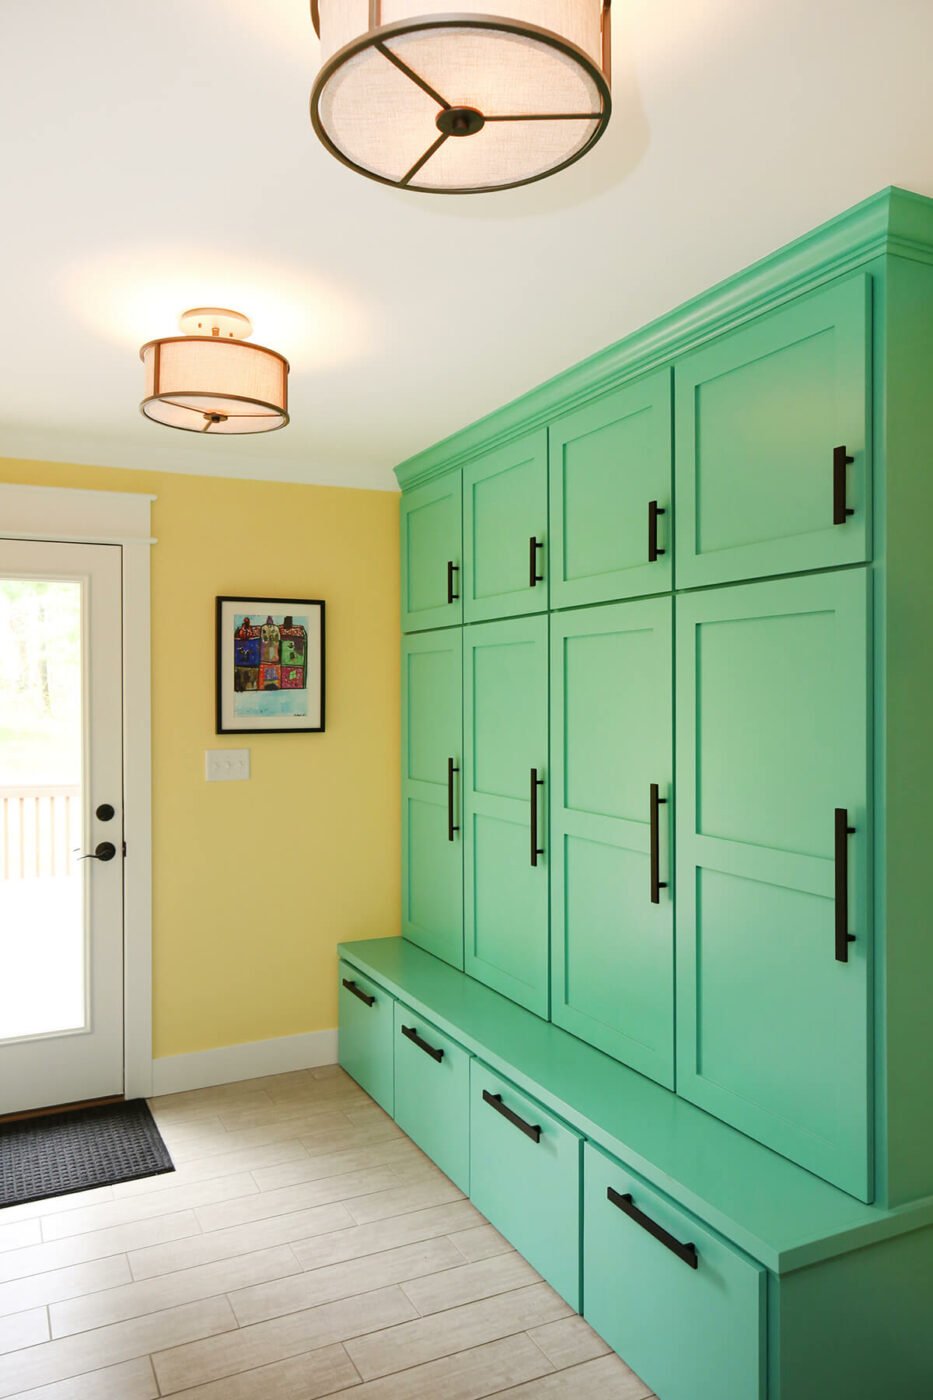 Bright Green Lockers And Built-in Bench